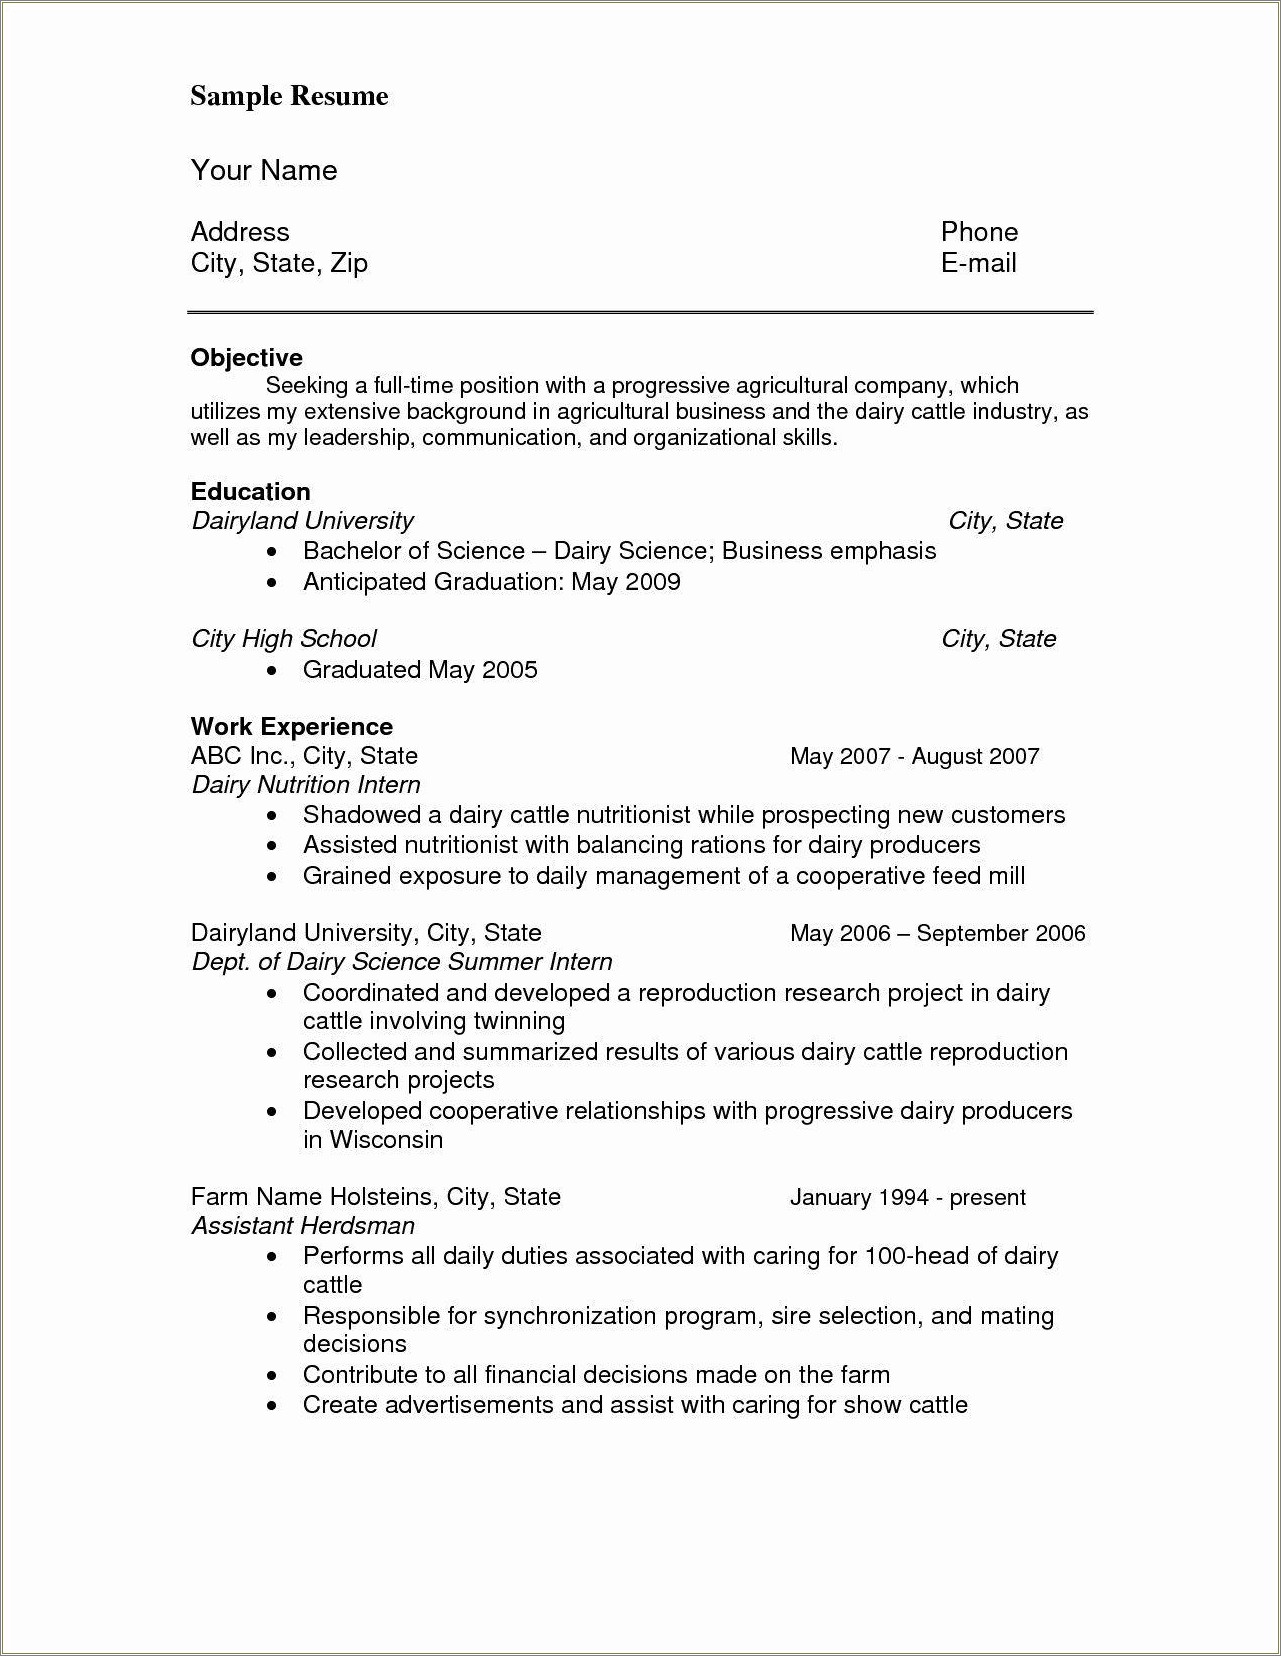 High School Education Section Of Resume